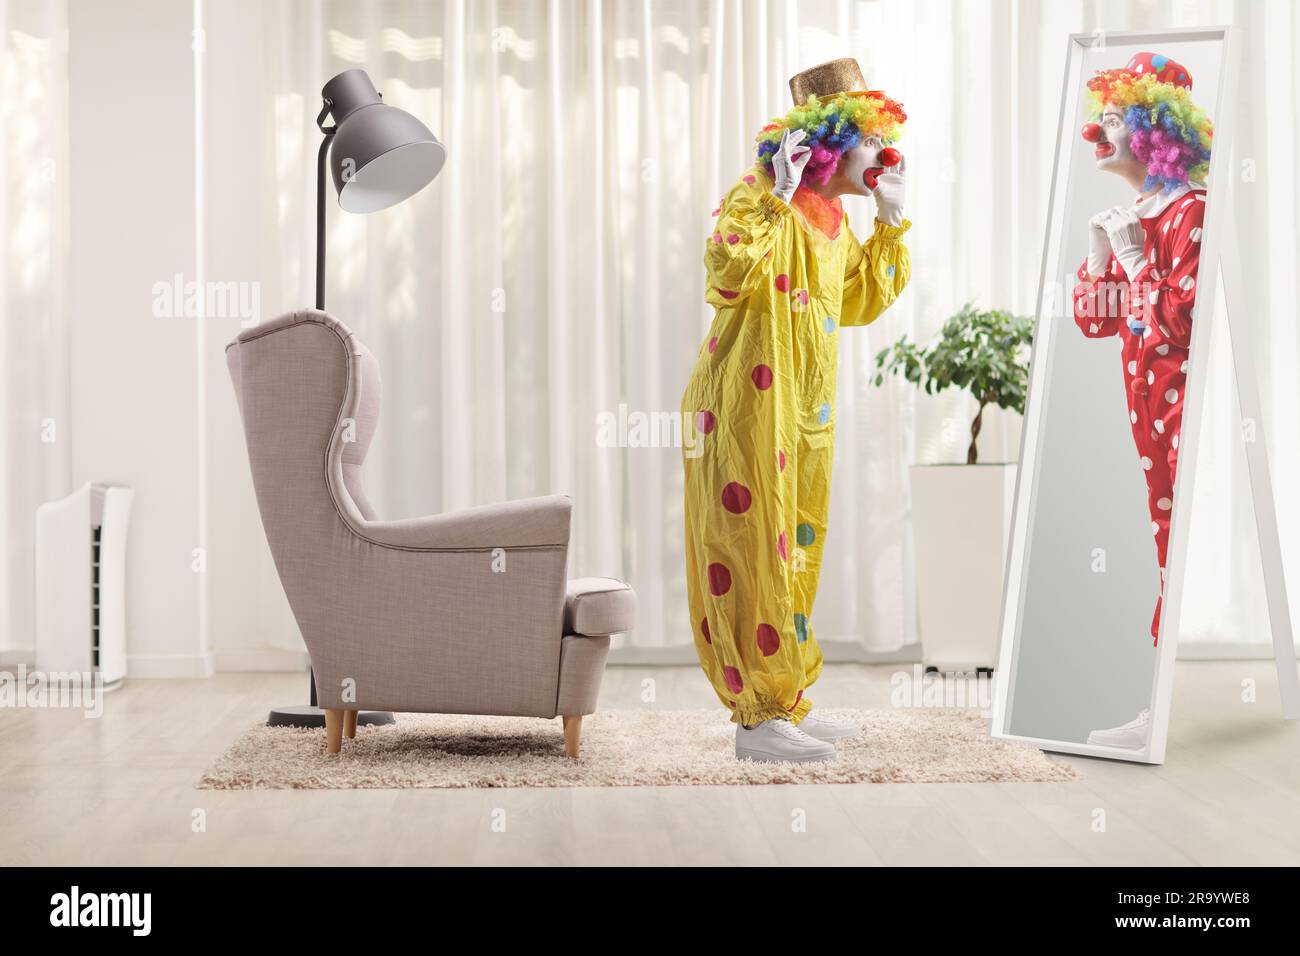 Clown in a yellow costume standing in front of a mirror and looking at a clown in a red costume in a room Stock Photo